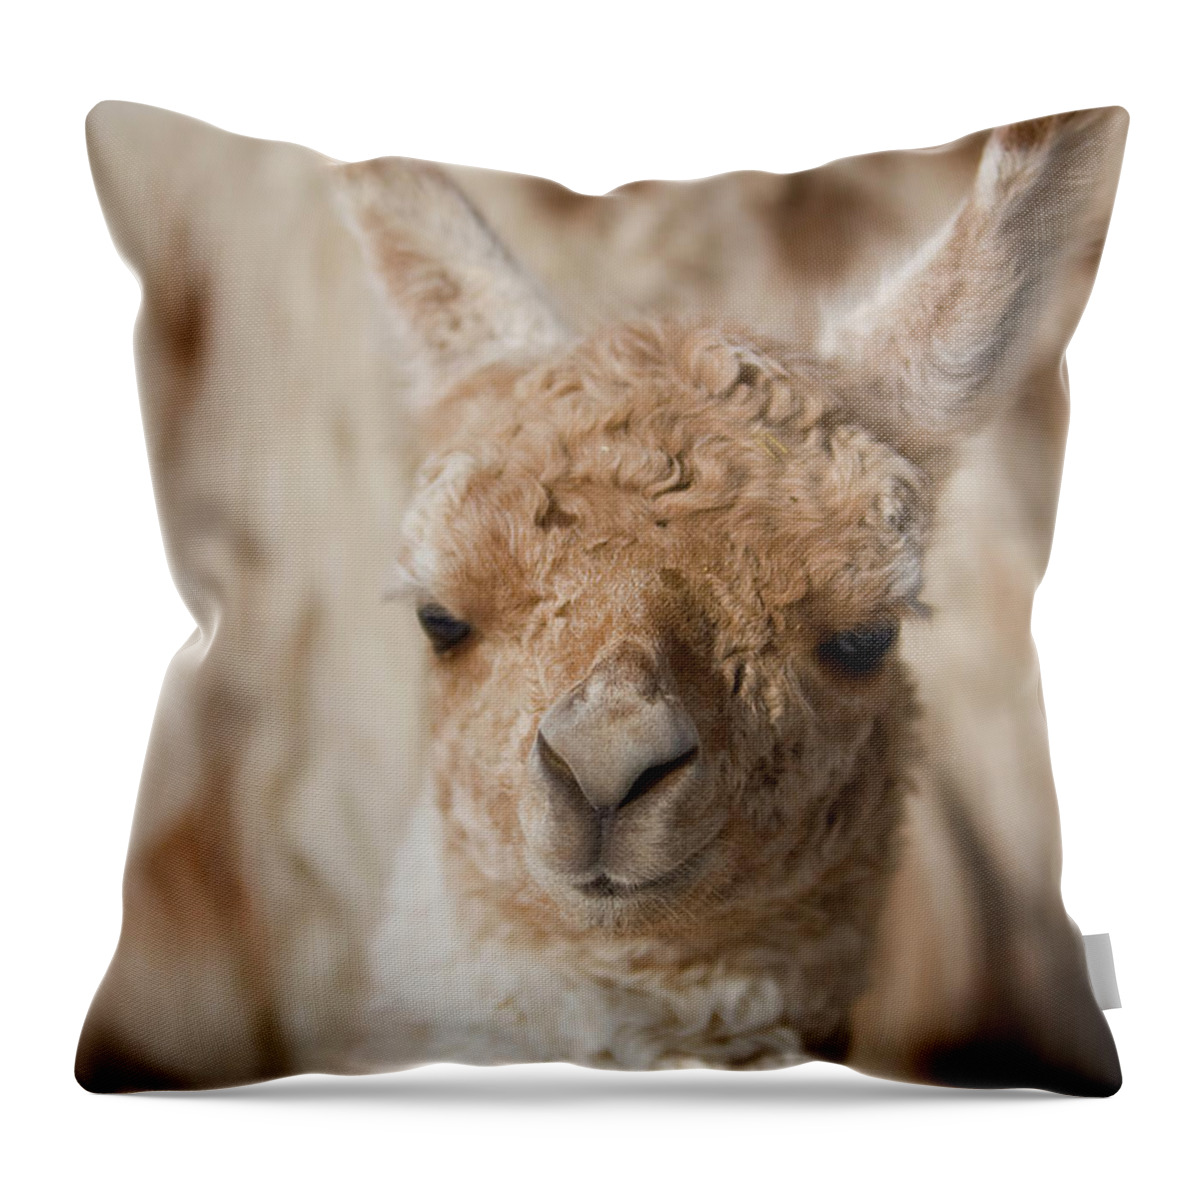 Animal Themes Throw Pillow featuring the photograph Baby Llama by Holly Hildreth